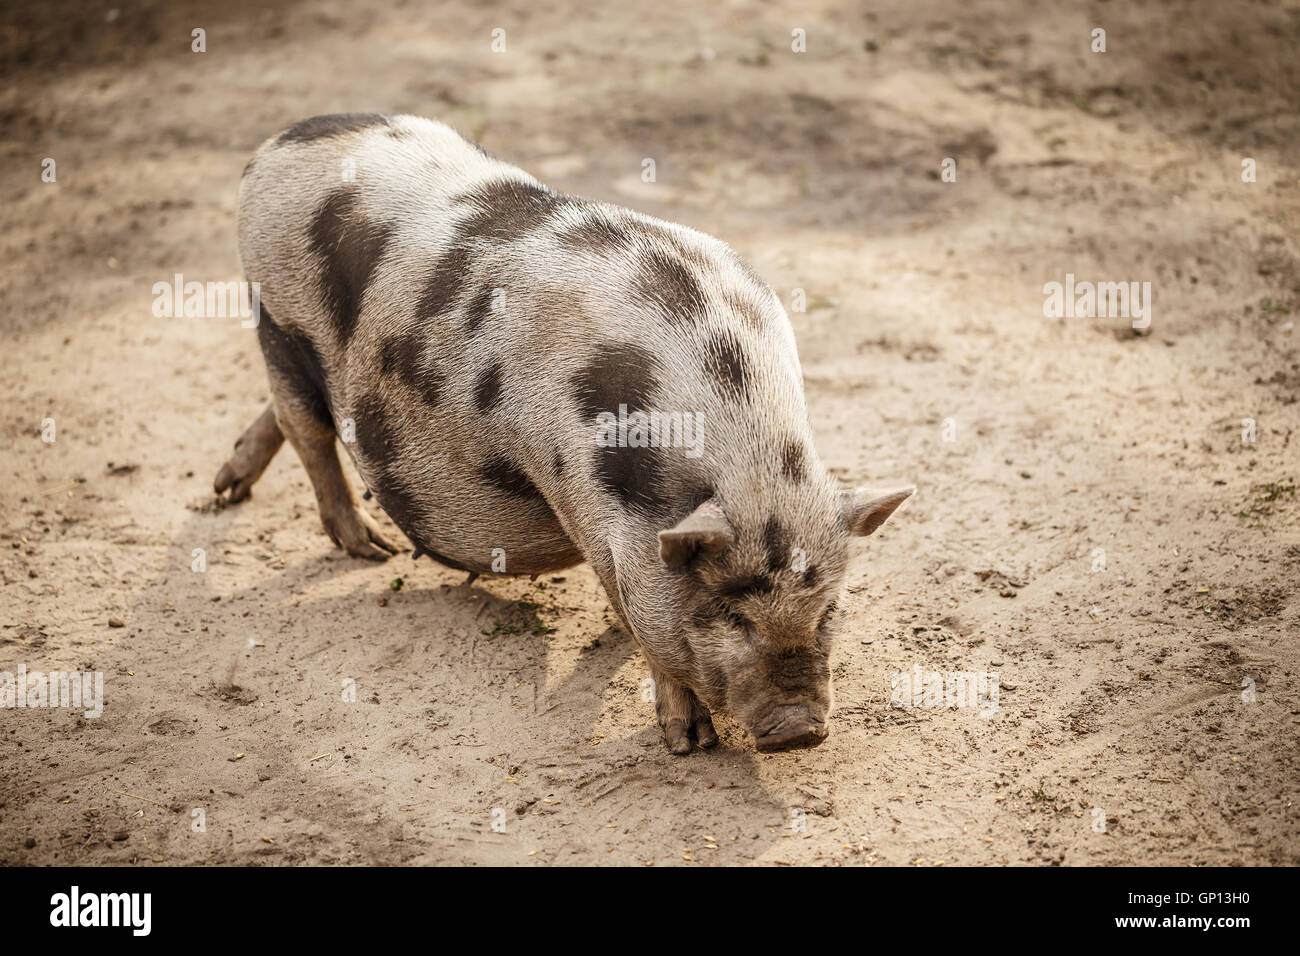 Pink and black speckled pot-bellied pig Stock Photo